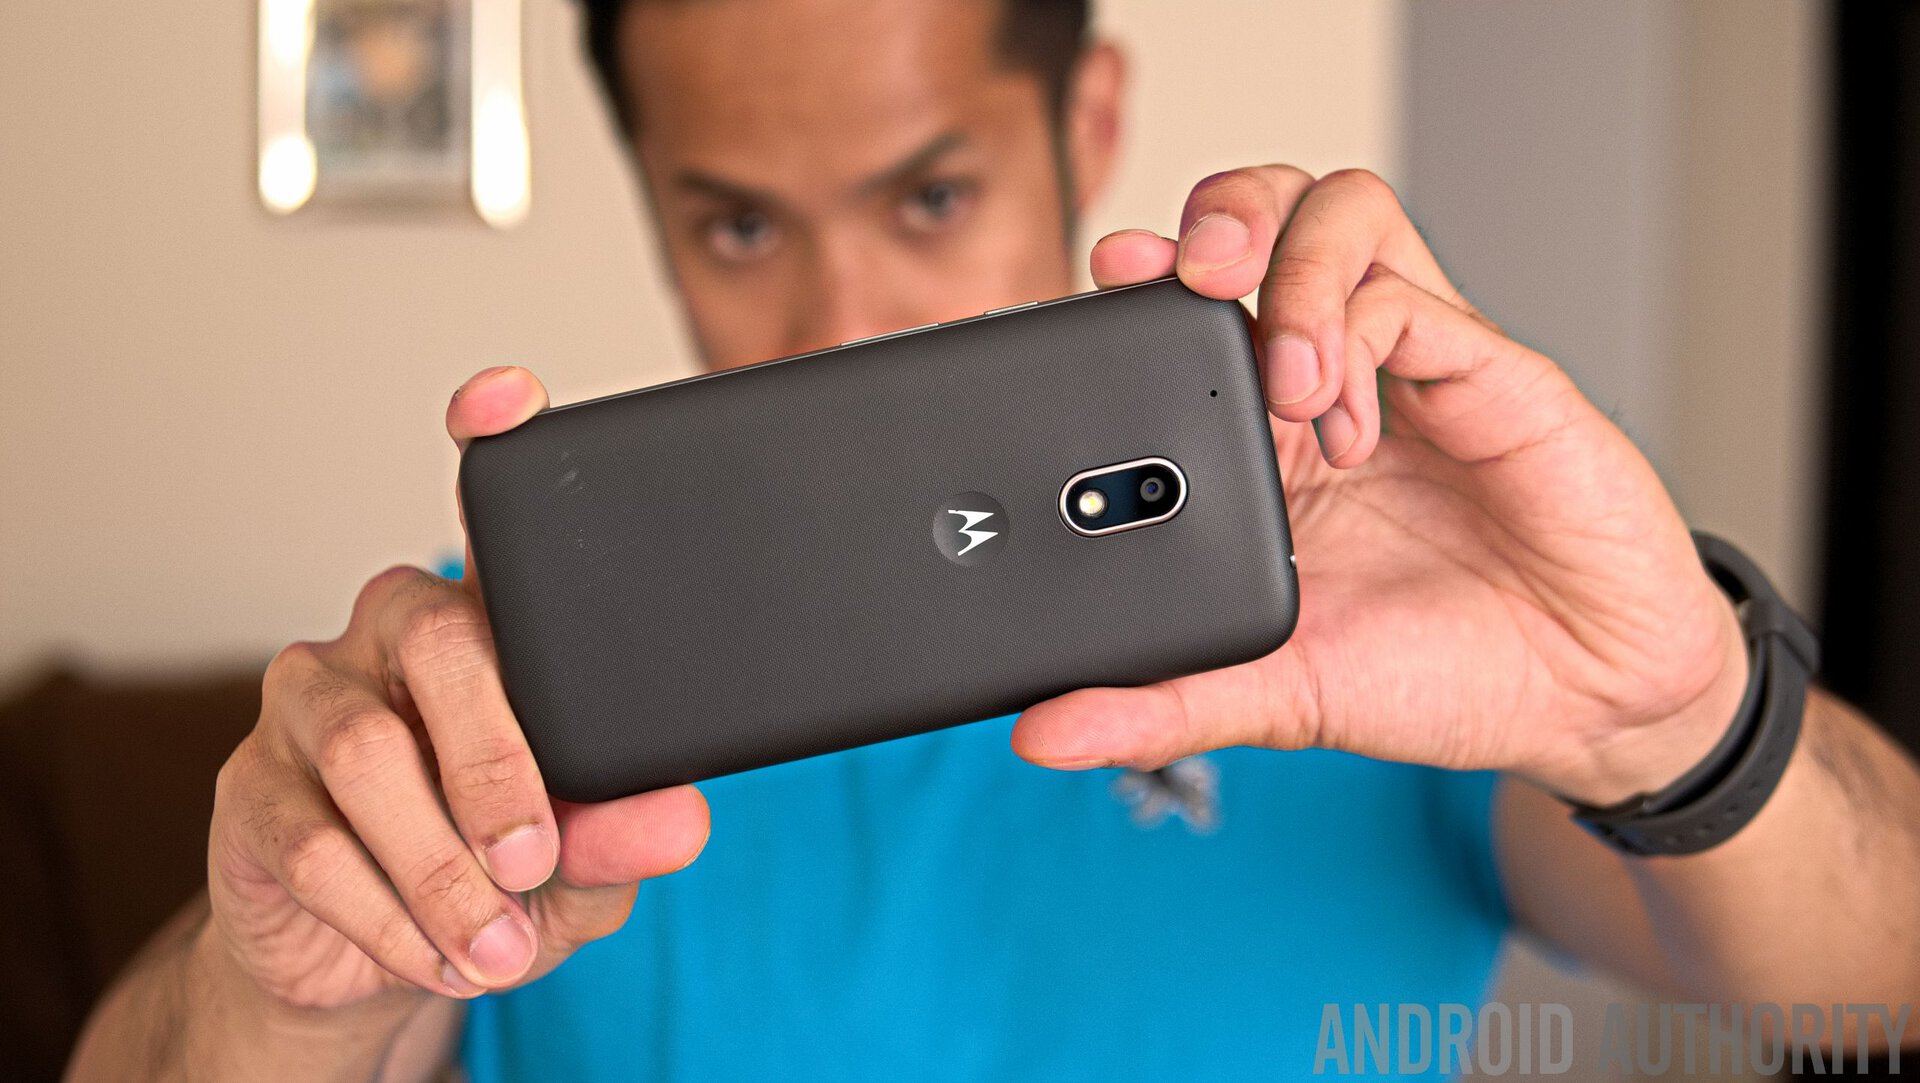 Moto G4 Play Review - Android Authority